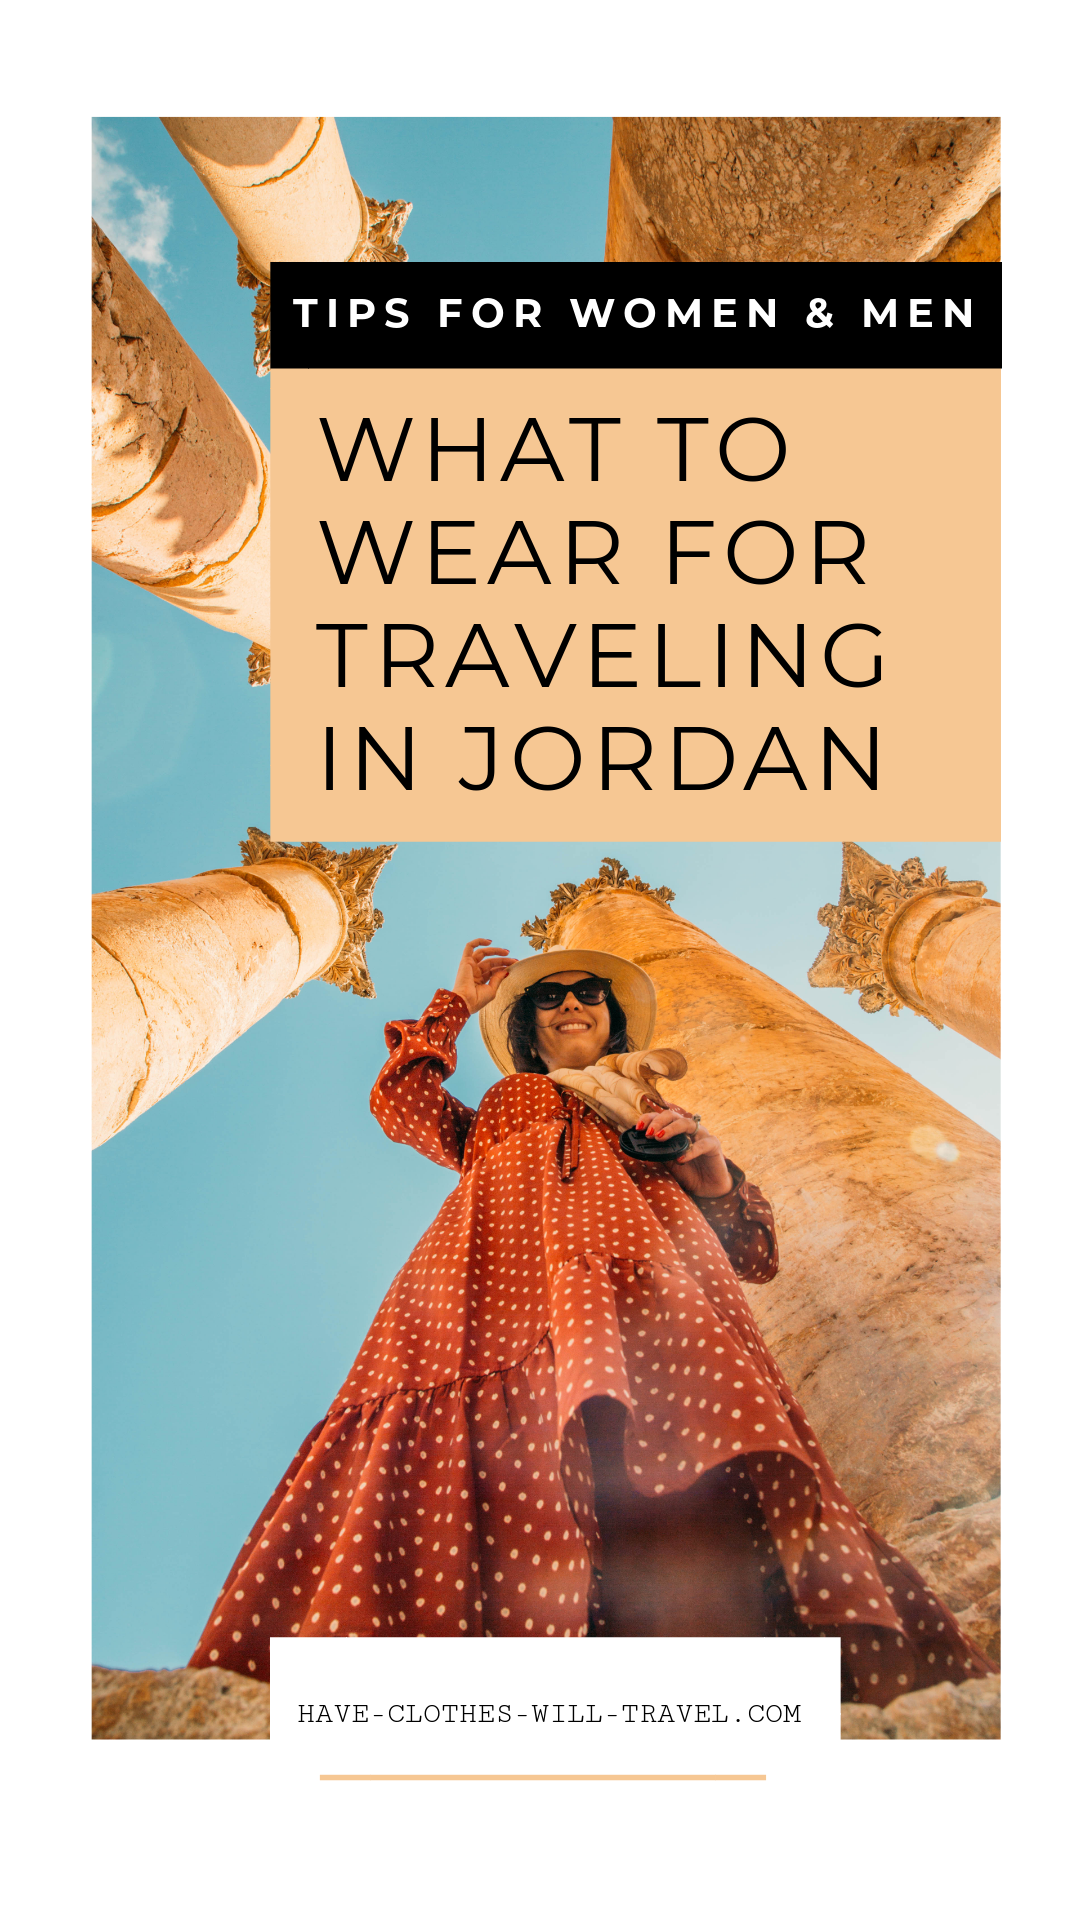 An image of a woman posing alongside stone columns in Jordan. Text in a colored box across the top of the image reads "tips for women and men" and "what to wear for traveling in Jordan"